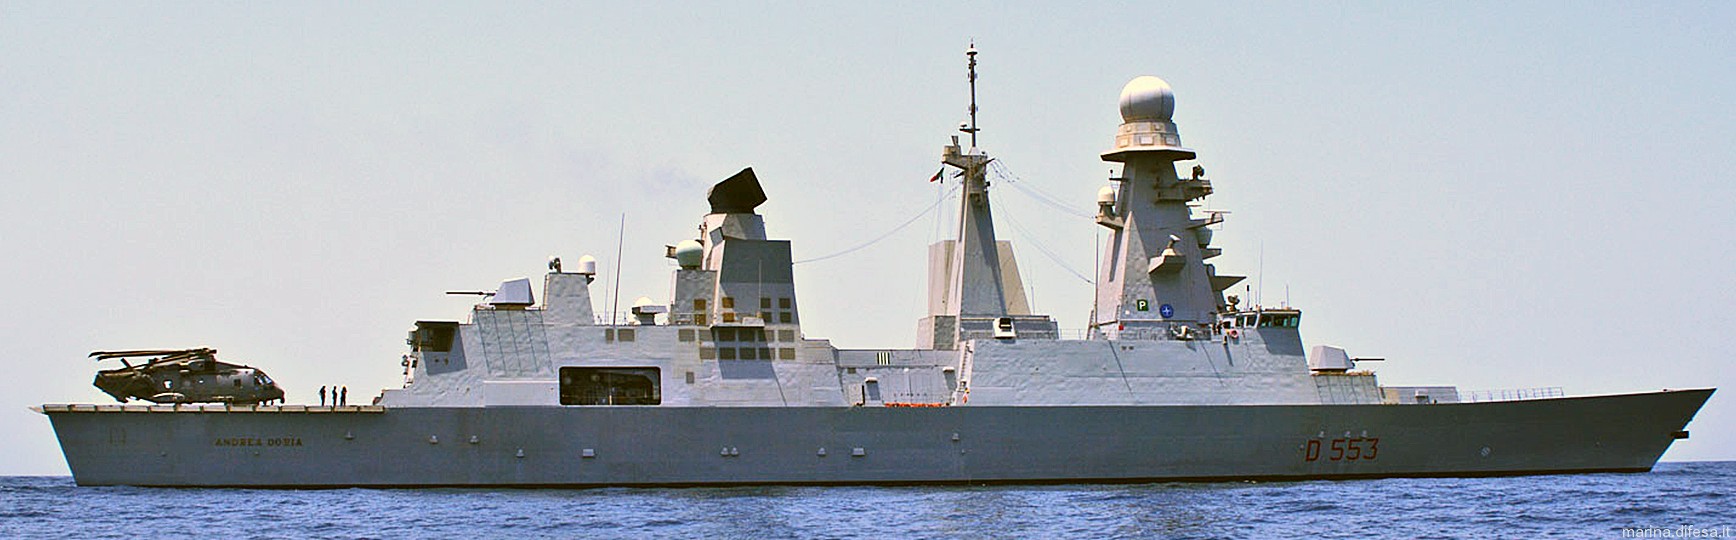 d-553 its andrea doria guided missile destroyer ddgh horizon class italian navy 11